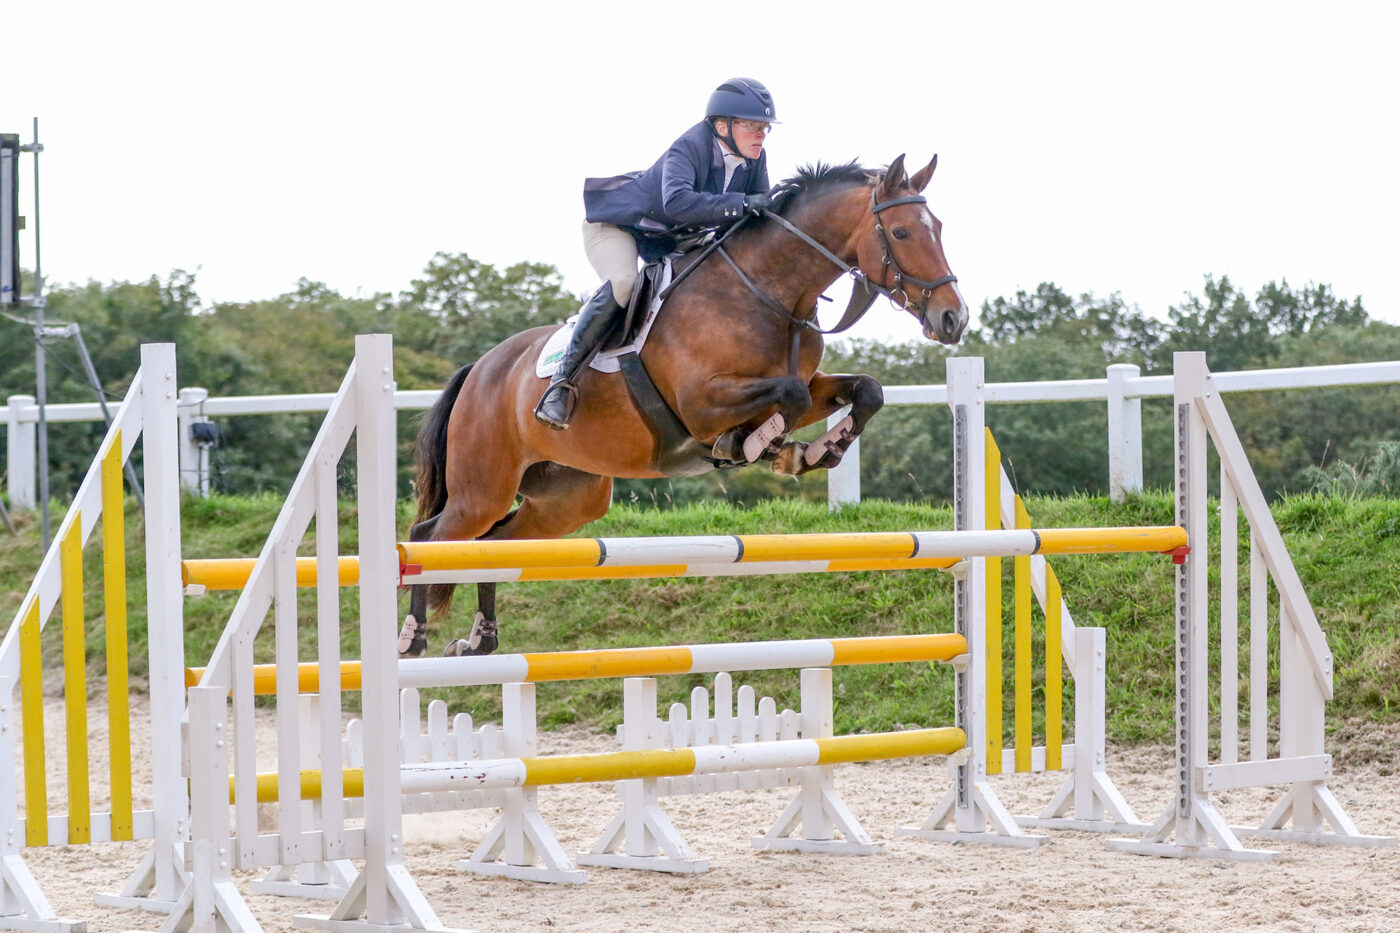 Horse and rider showjumping